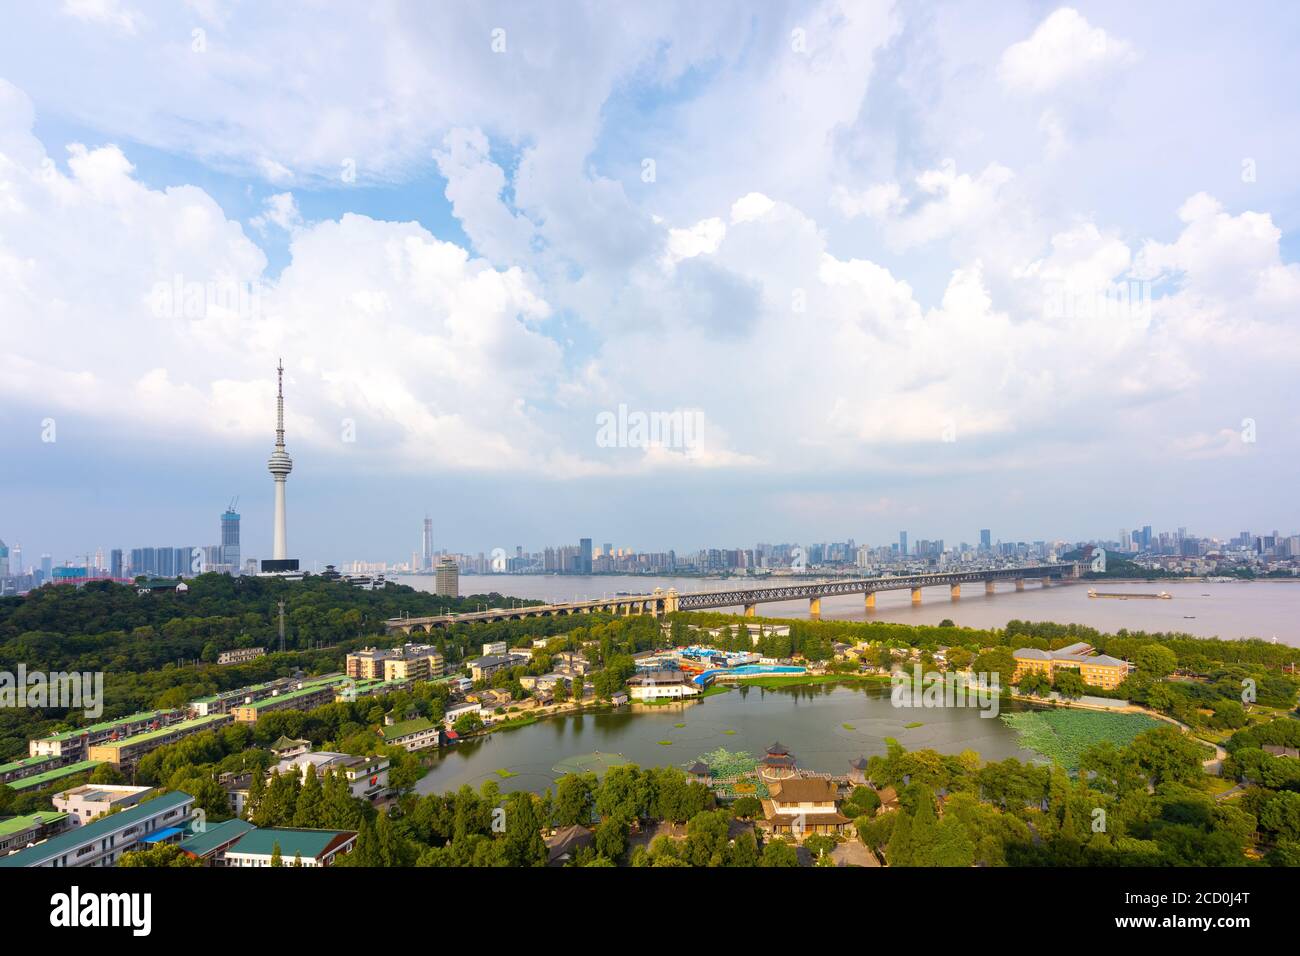 Wuhan skyline and Yangtze river with supertall skyscraper under construction in Wuhan Hubei China. Stock Photo